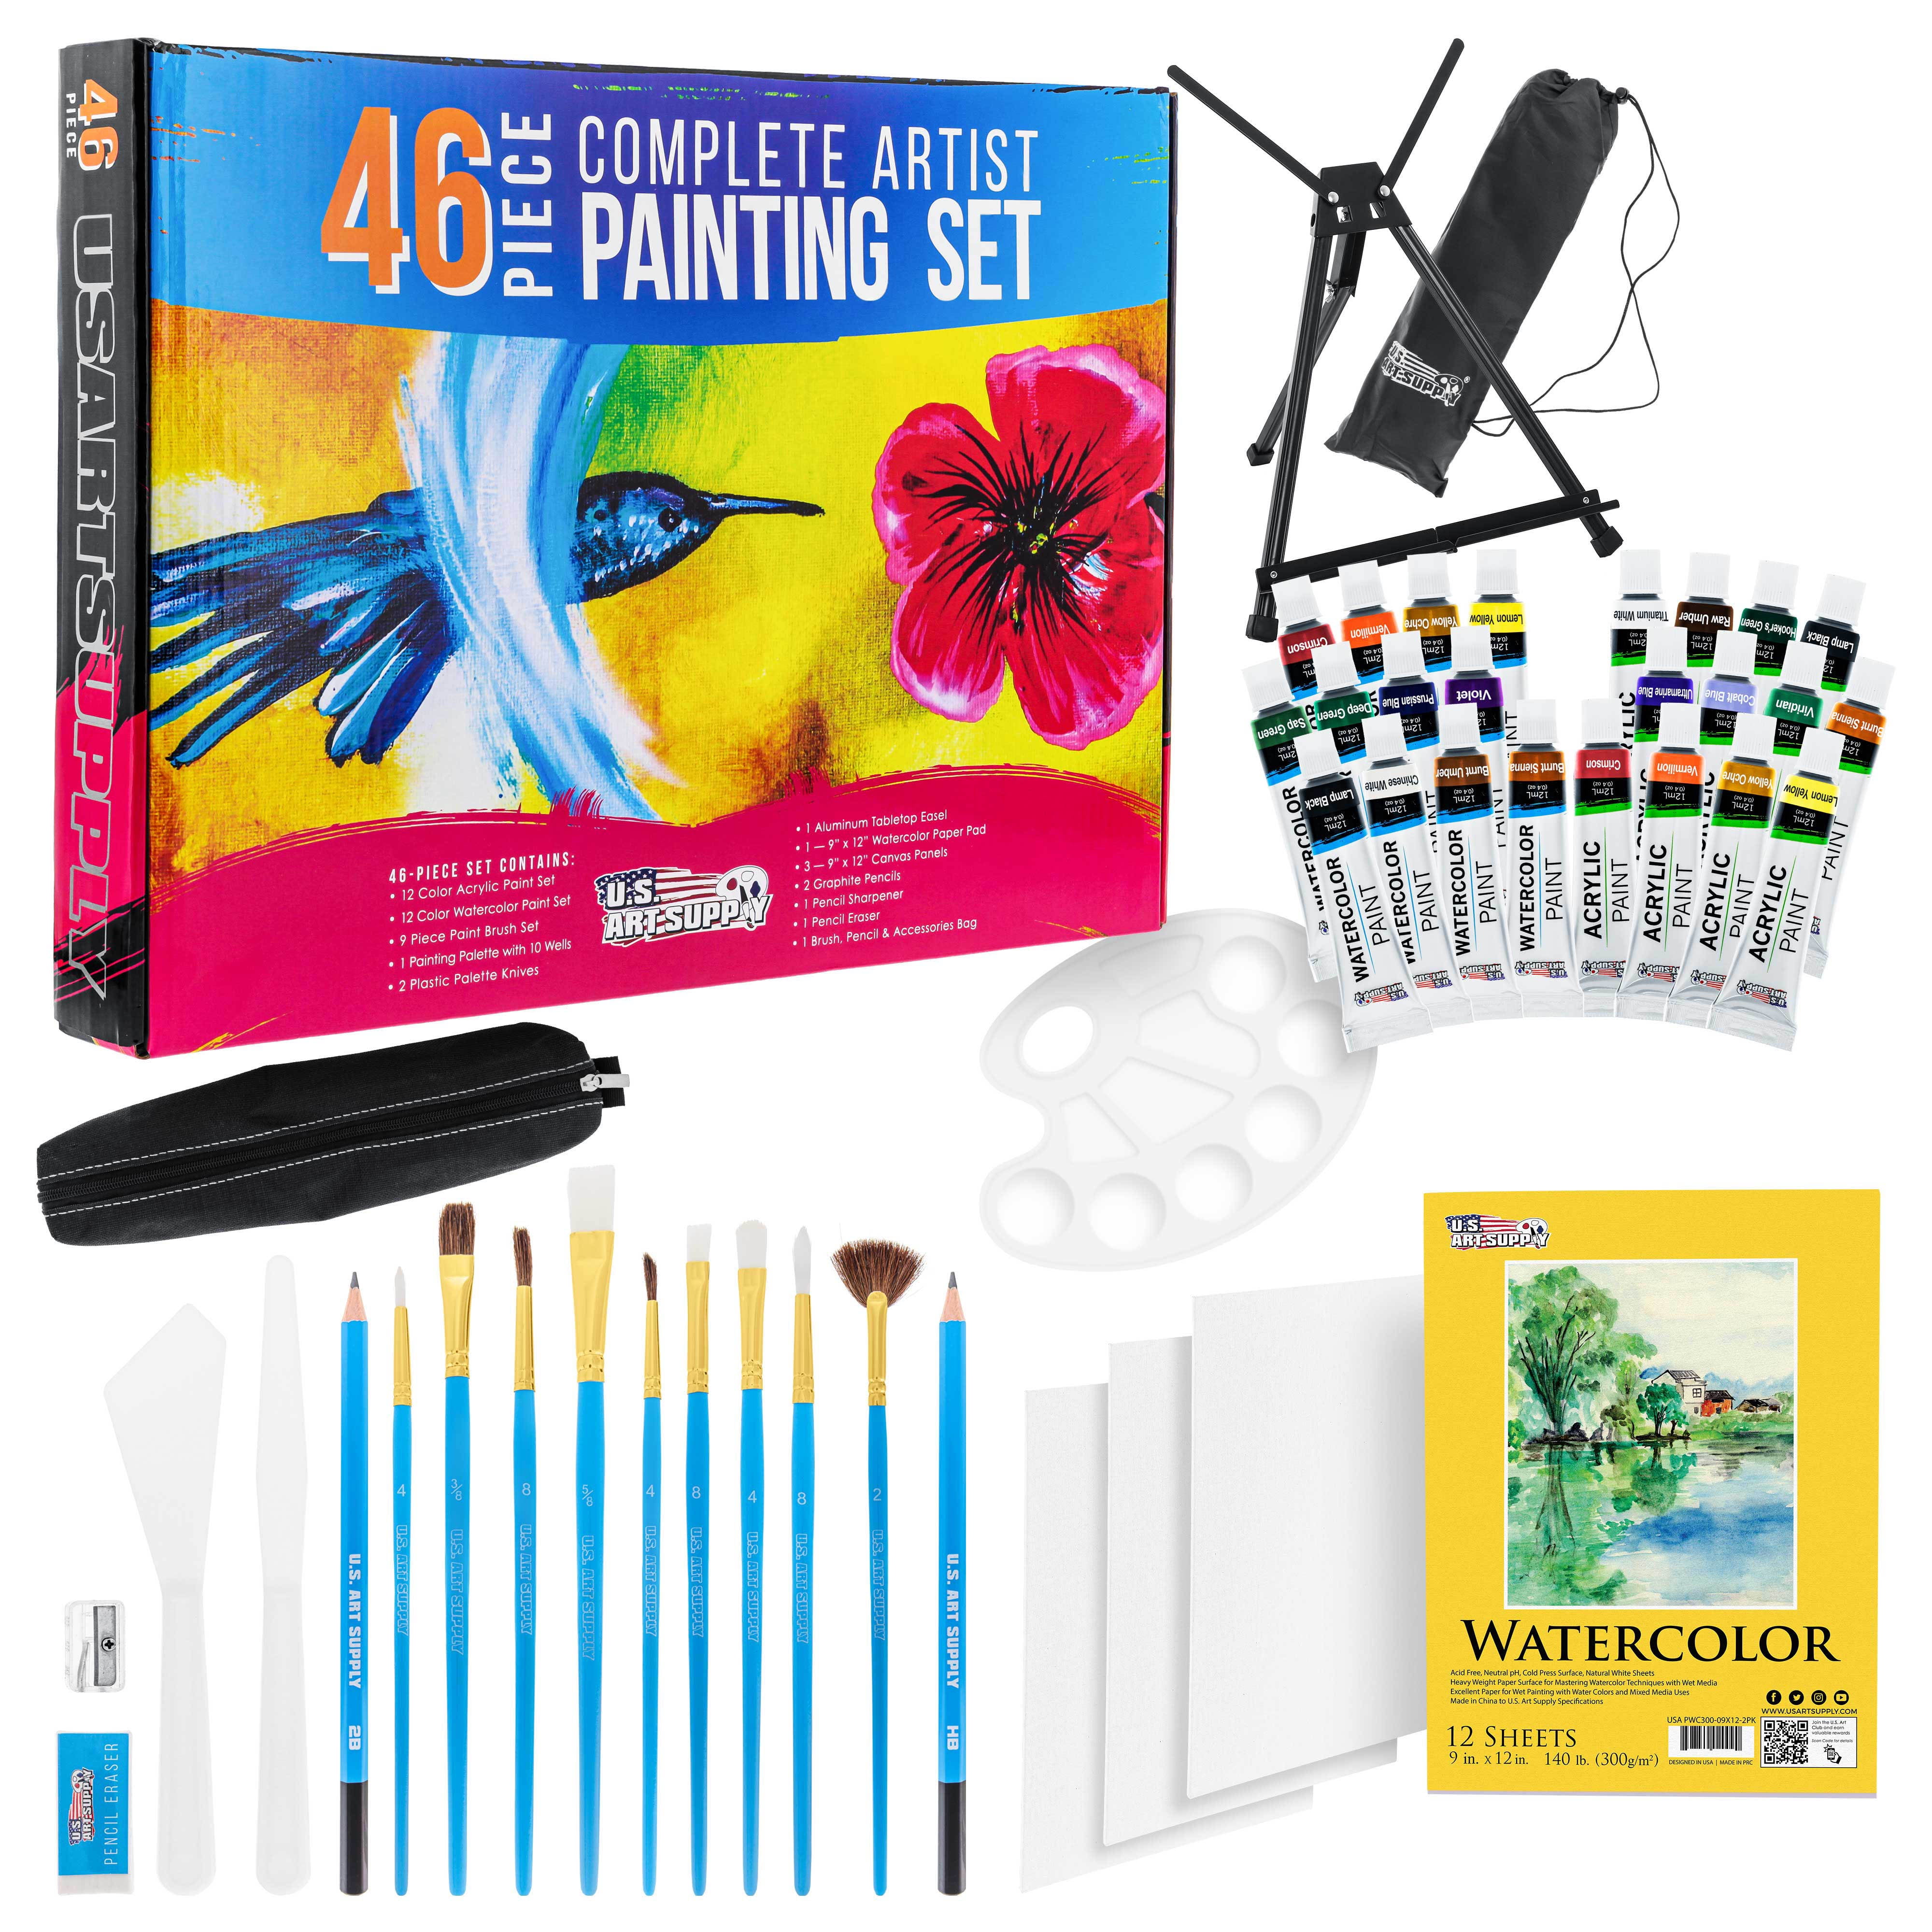 U.s. Art Supply 46-Piece Complete Artist Painting Set With Easel - 12 Acrylic & 12 Watercolor Paint Colors, Brushes, Canvas Panels, Watercolor Pad, Painting Palette, Pencils - Kid, Student, Adult Kit - Walmart.com